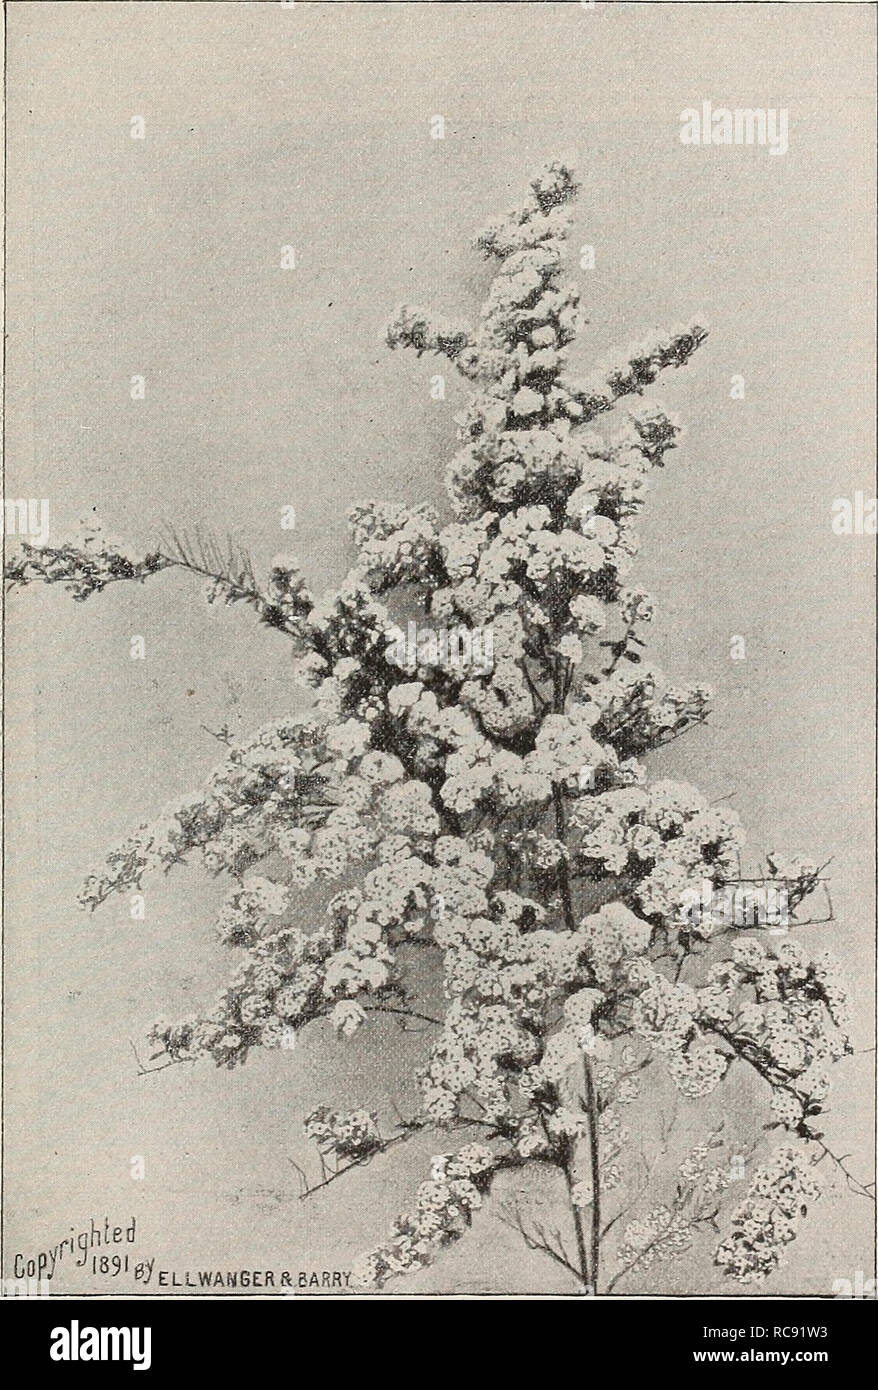 . Ellwanger &amp; Barry's general catalogue of fruit &amp; ornamental trees, roses etc. GENERAL CATALOGUE. 95 -Spirsea Tliiinbergii. Thunberg'S Spiraea. D. Of dwarf habit and rounded, graceful form ; branches slender and somewhat drooping-; loliag-e narrow and yellowish green; flowers small, white, appearing early in spring, being one of the first Spli'seas to flower. Esteemed on account of its neat, graceful habit. Forces well in winter. 33c. S. trilobata. Three-lobed Spir^a. D. A vigorous grower. Three-lobed leaves; white flowers. 35c. S. xilmifolia. Elm-leaved Spiraea. D. Leaves somewhat re Stock Photo